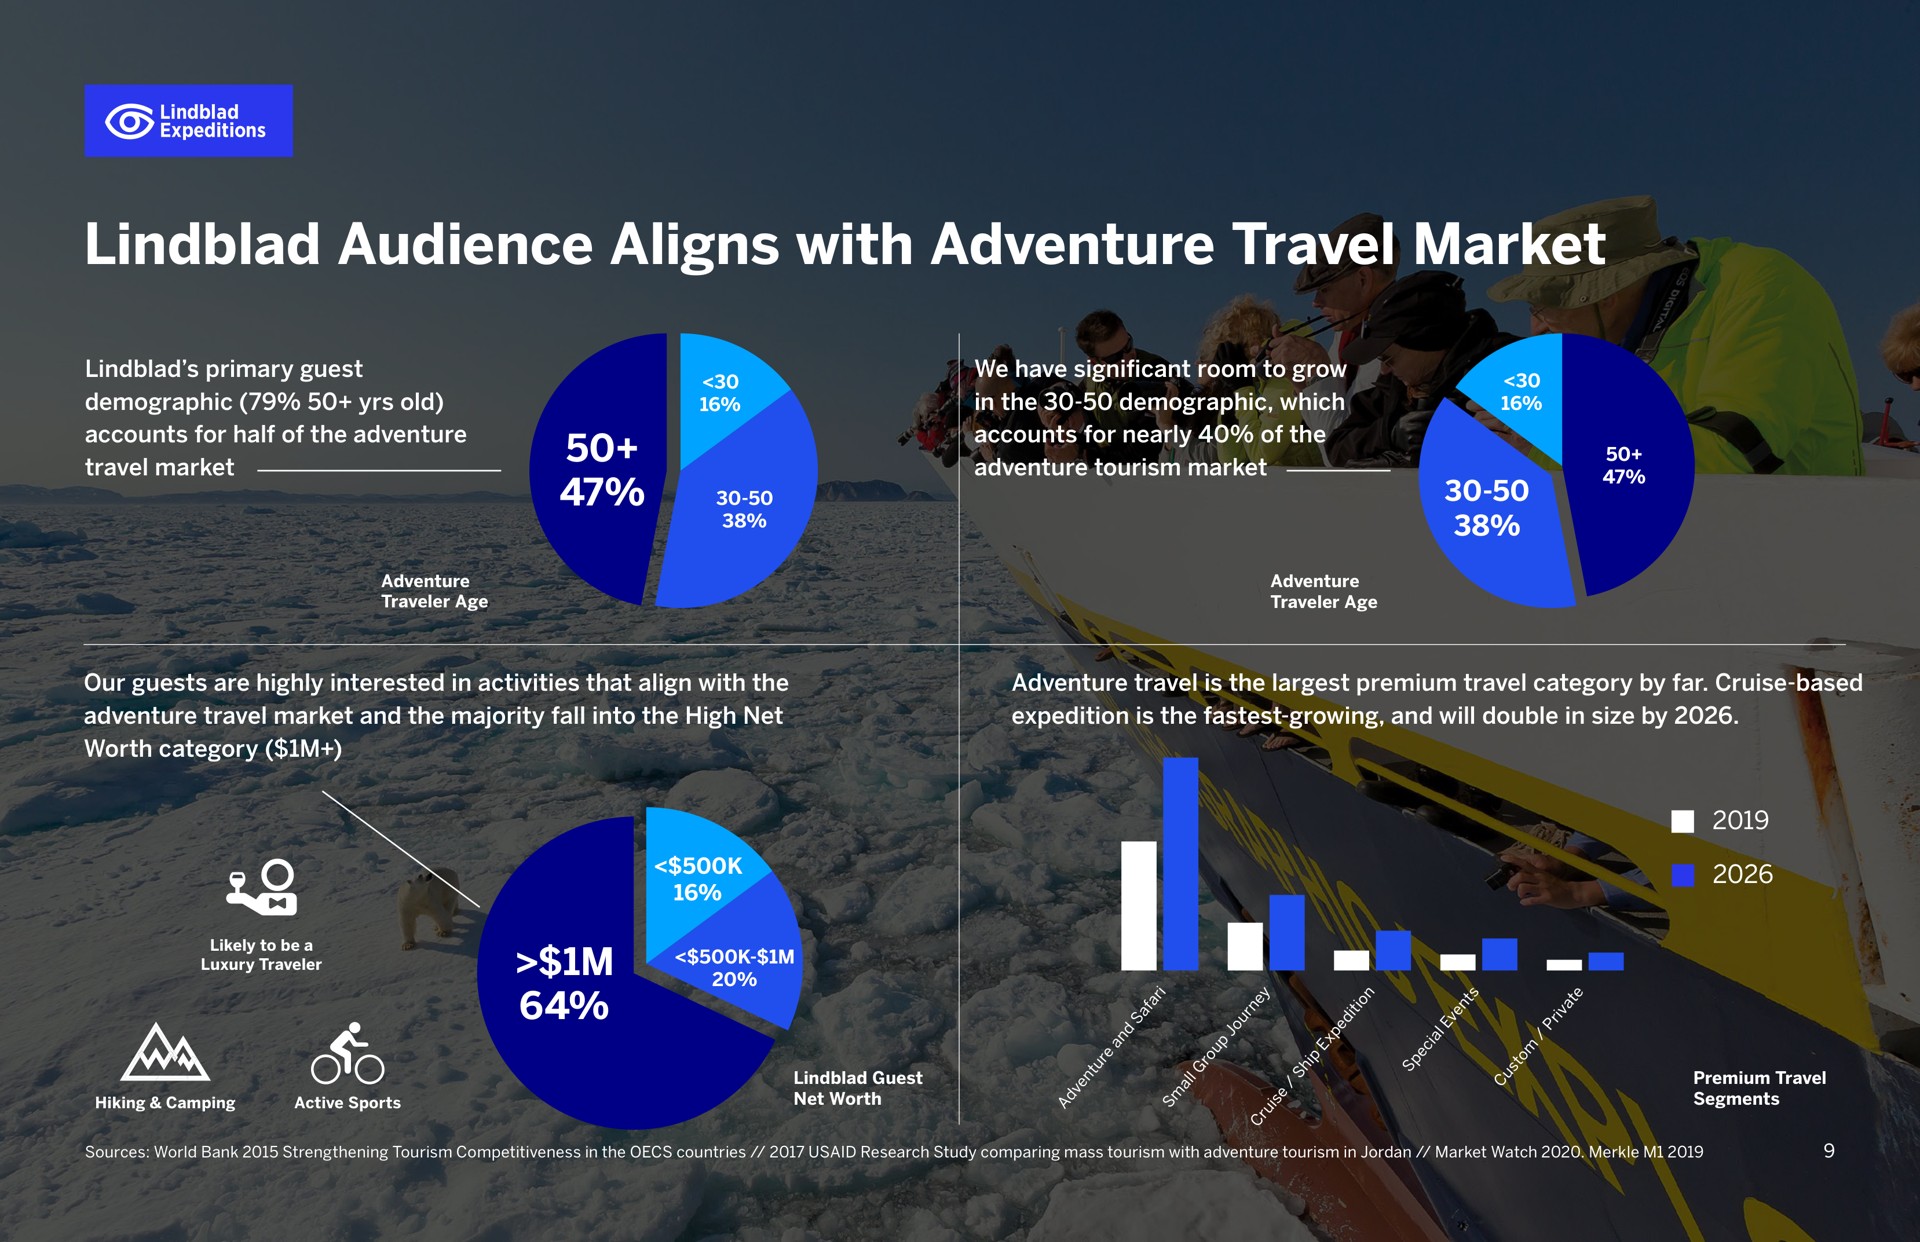 audience aligns with adventure travel market do | Lindblad